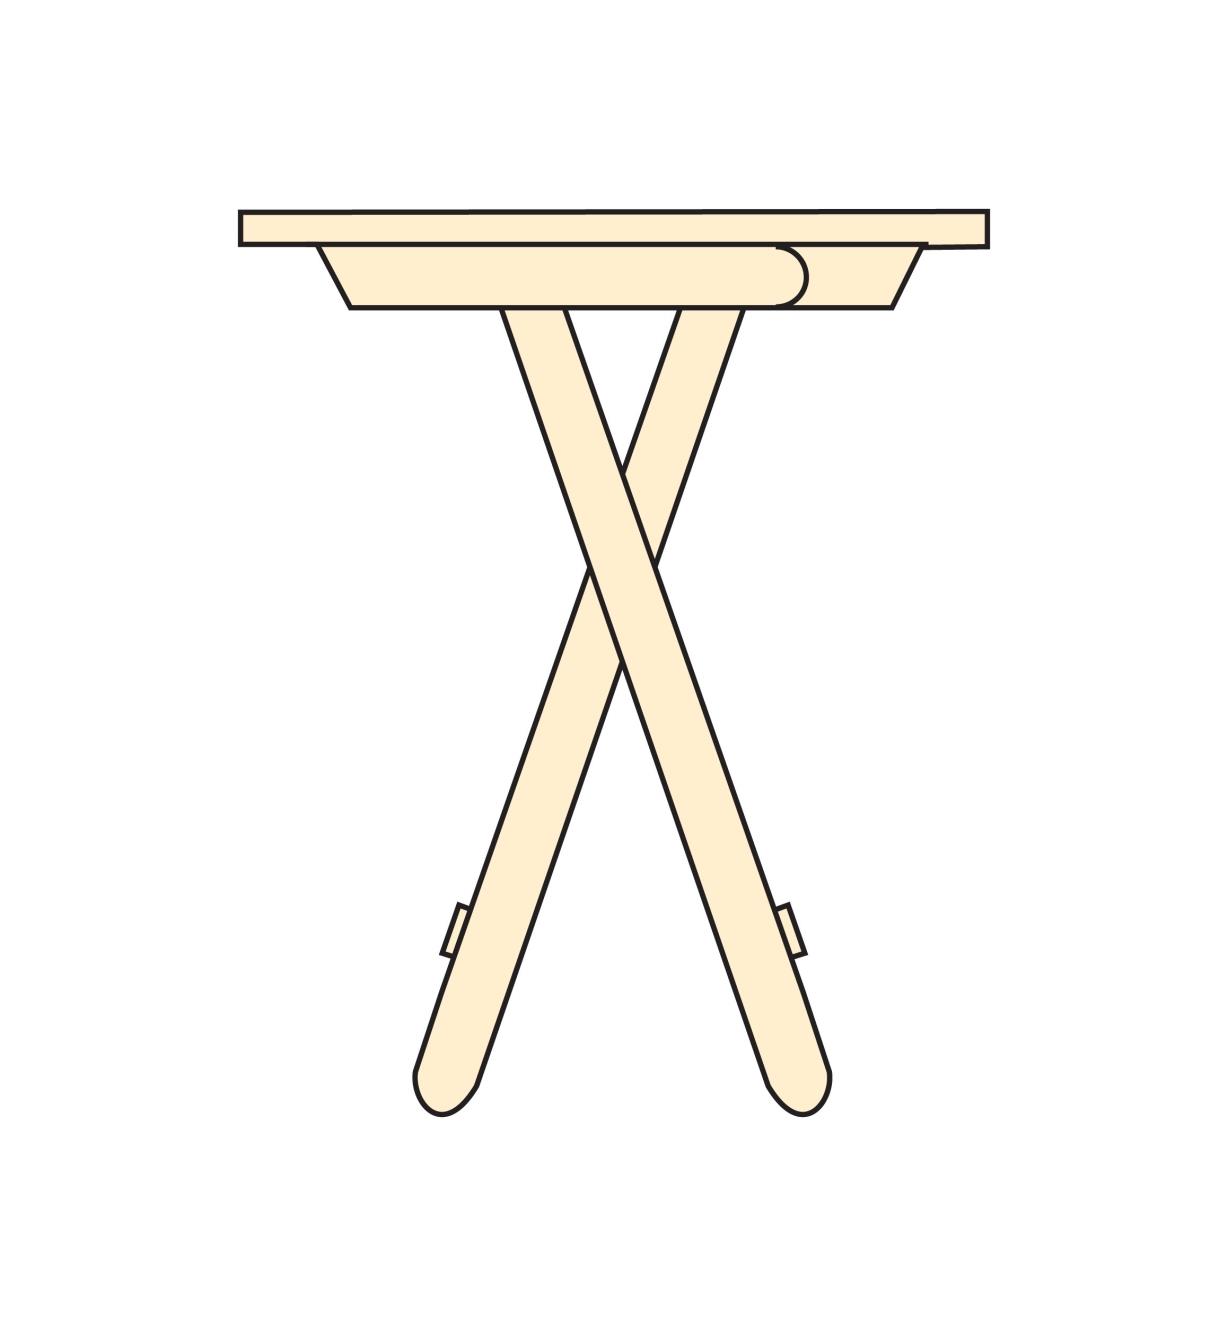 Illustrated side view of completed table, unfolded